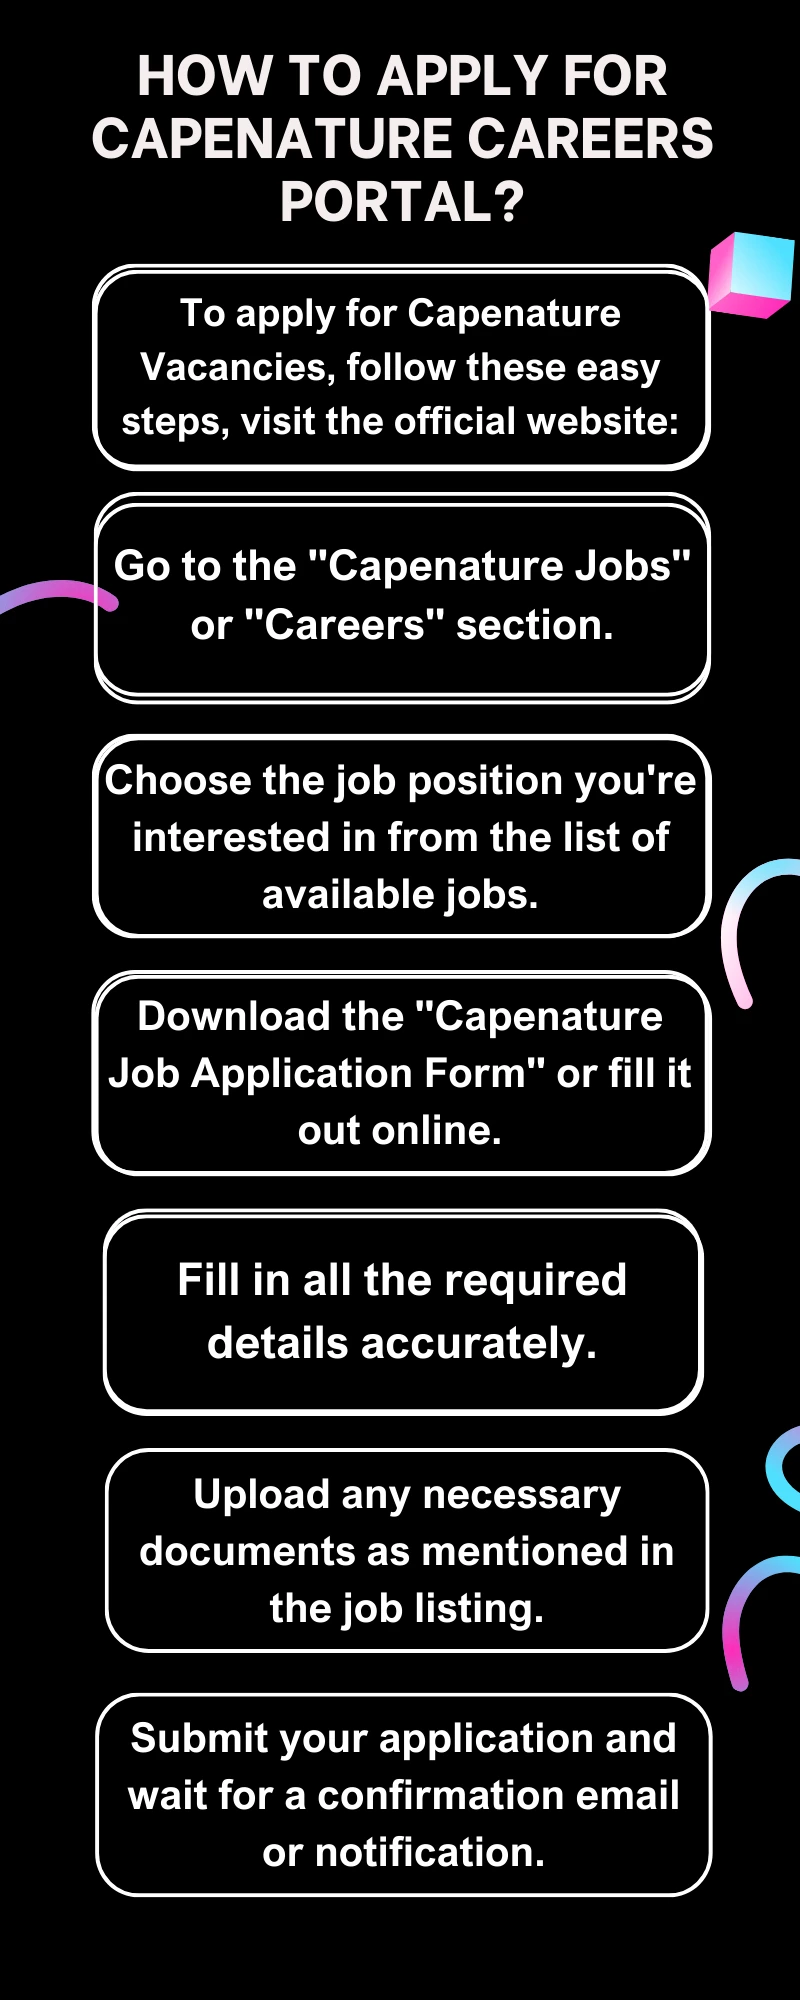 How To Apply for Capenature Careers Portal?